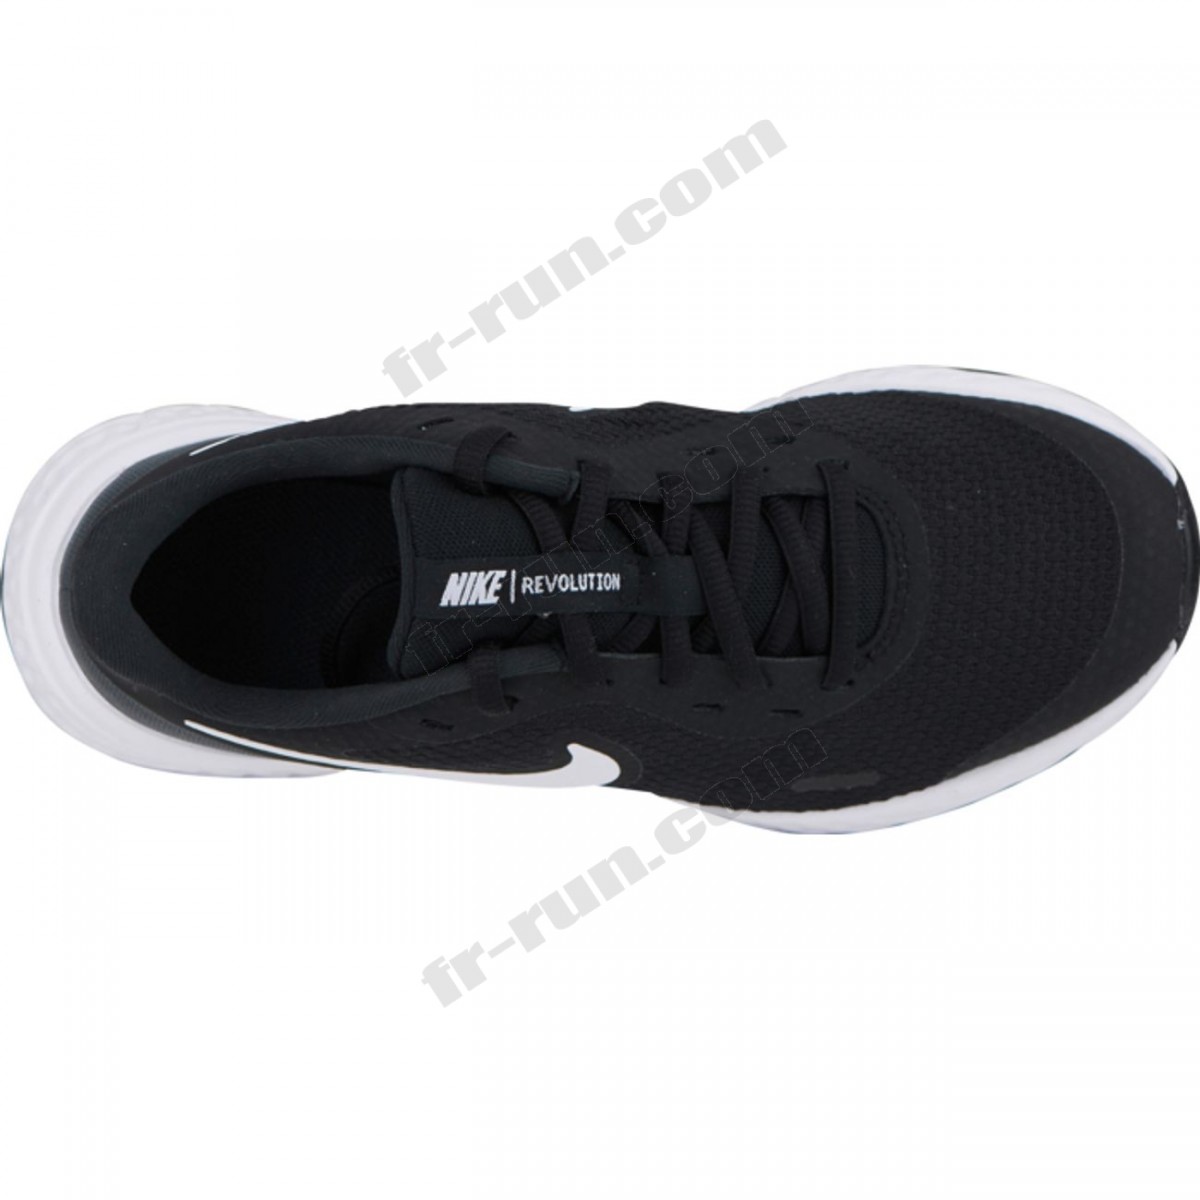 Nike/CHAUSSURES BASSES running homme NIKE NIKE REVOLUTION 5 √ Nouveau style √ Soldes - -2